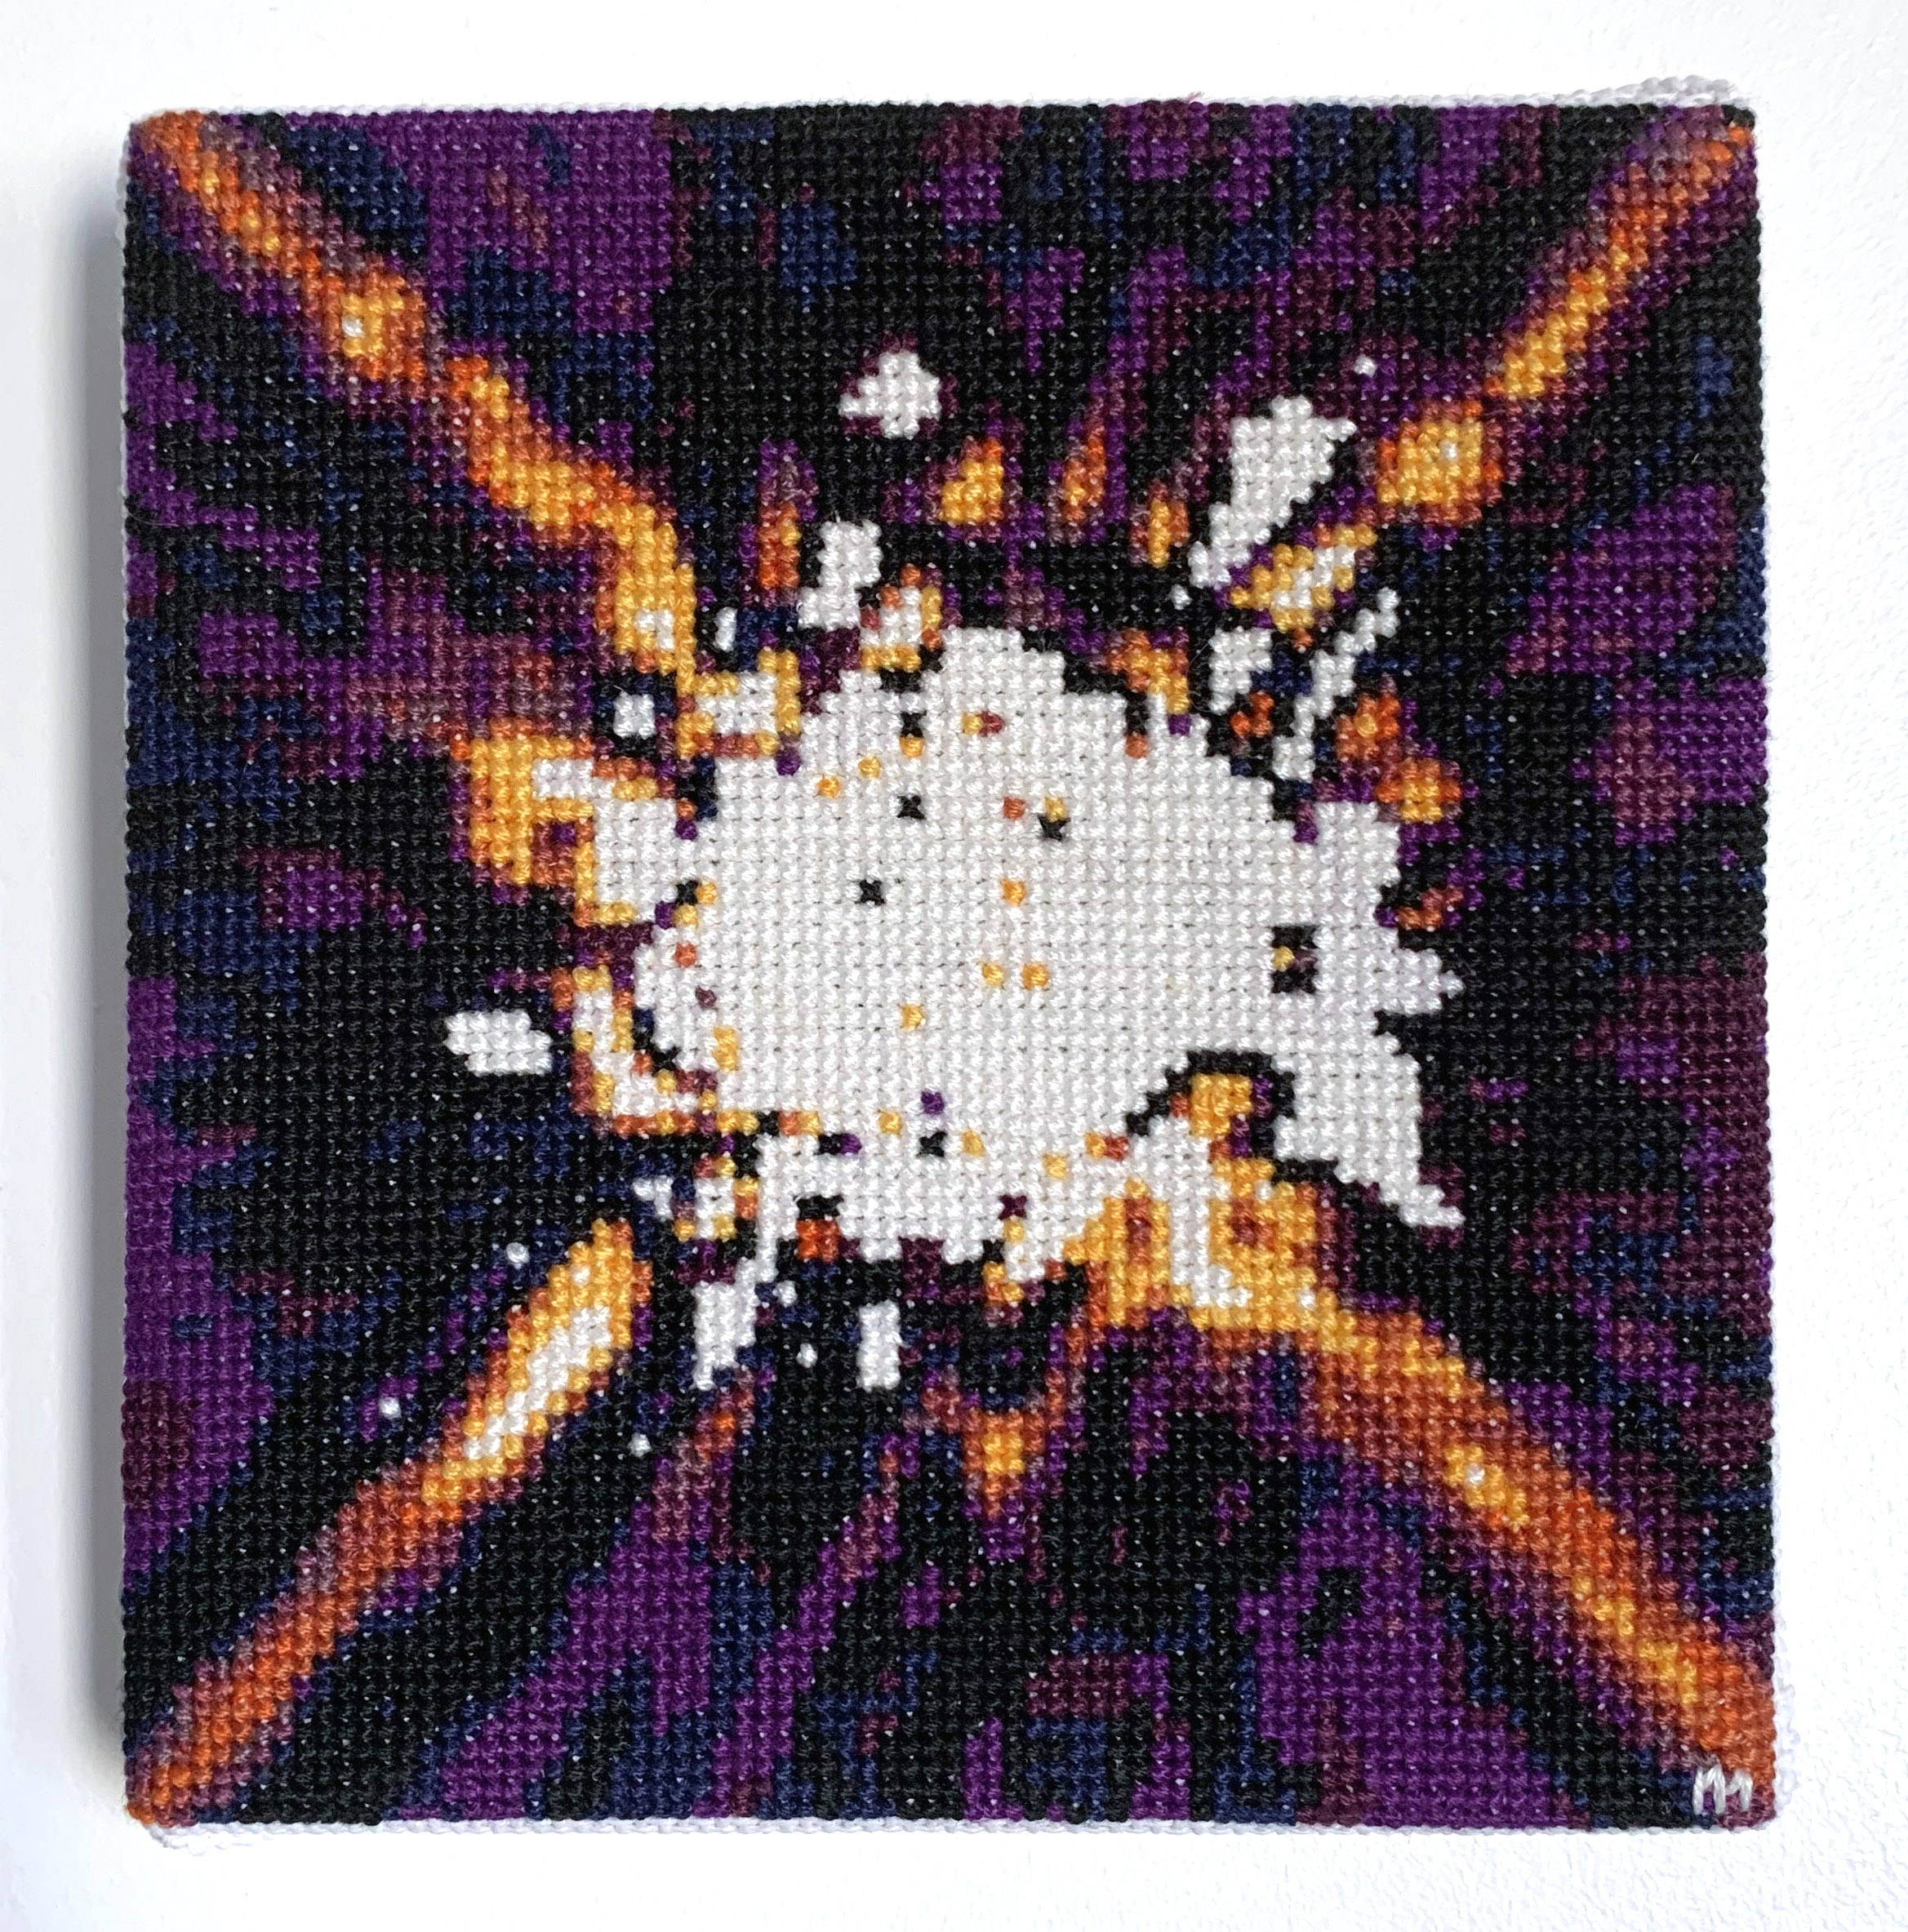  / Cross-stitch embroidery of the star HR 8799, inspired by an Hubble NICMOS shot. Art by artist Marine Beaufils.